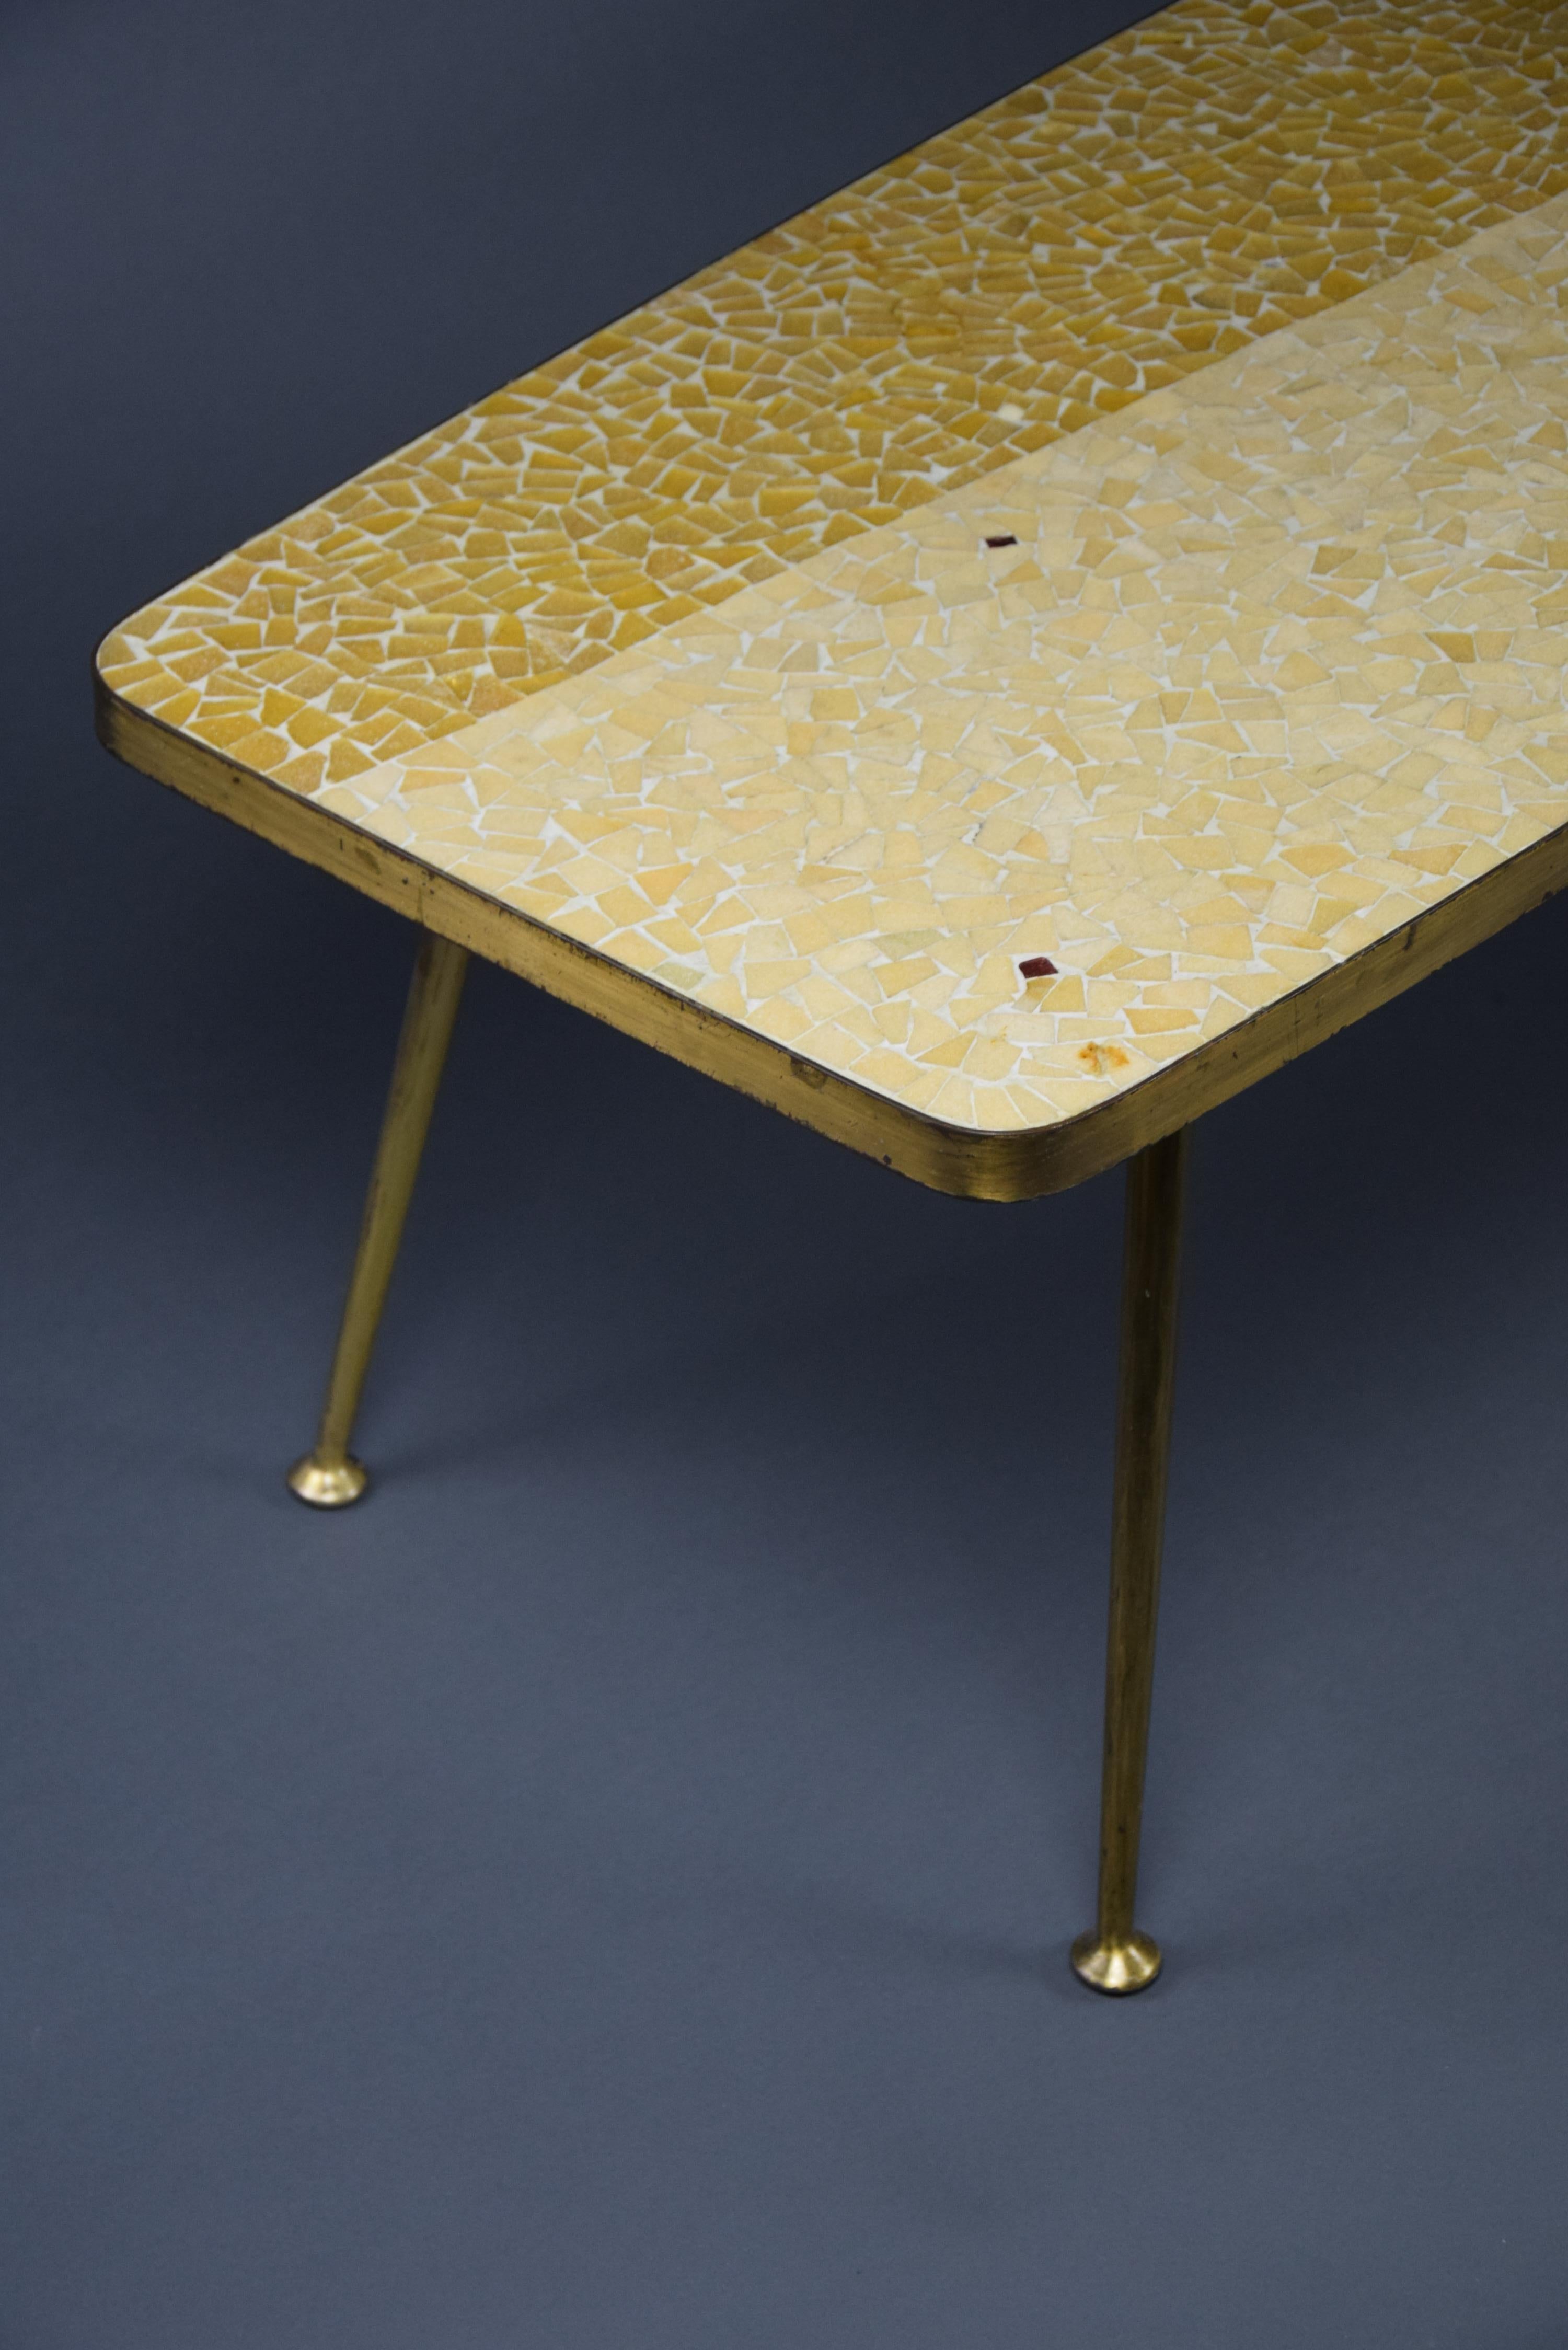 Laiton Table basse Berthold Muller Modernity Yellow and Sand Colored Mosaic en vente